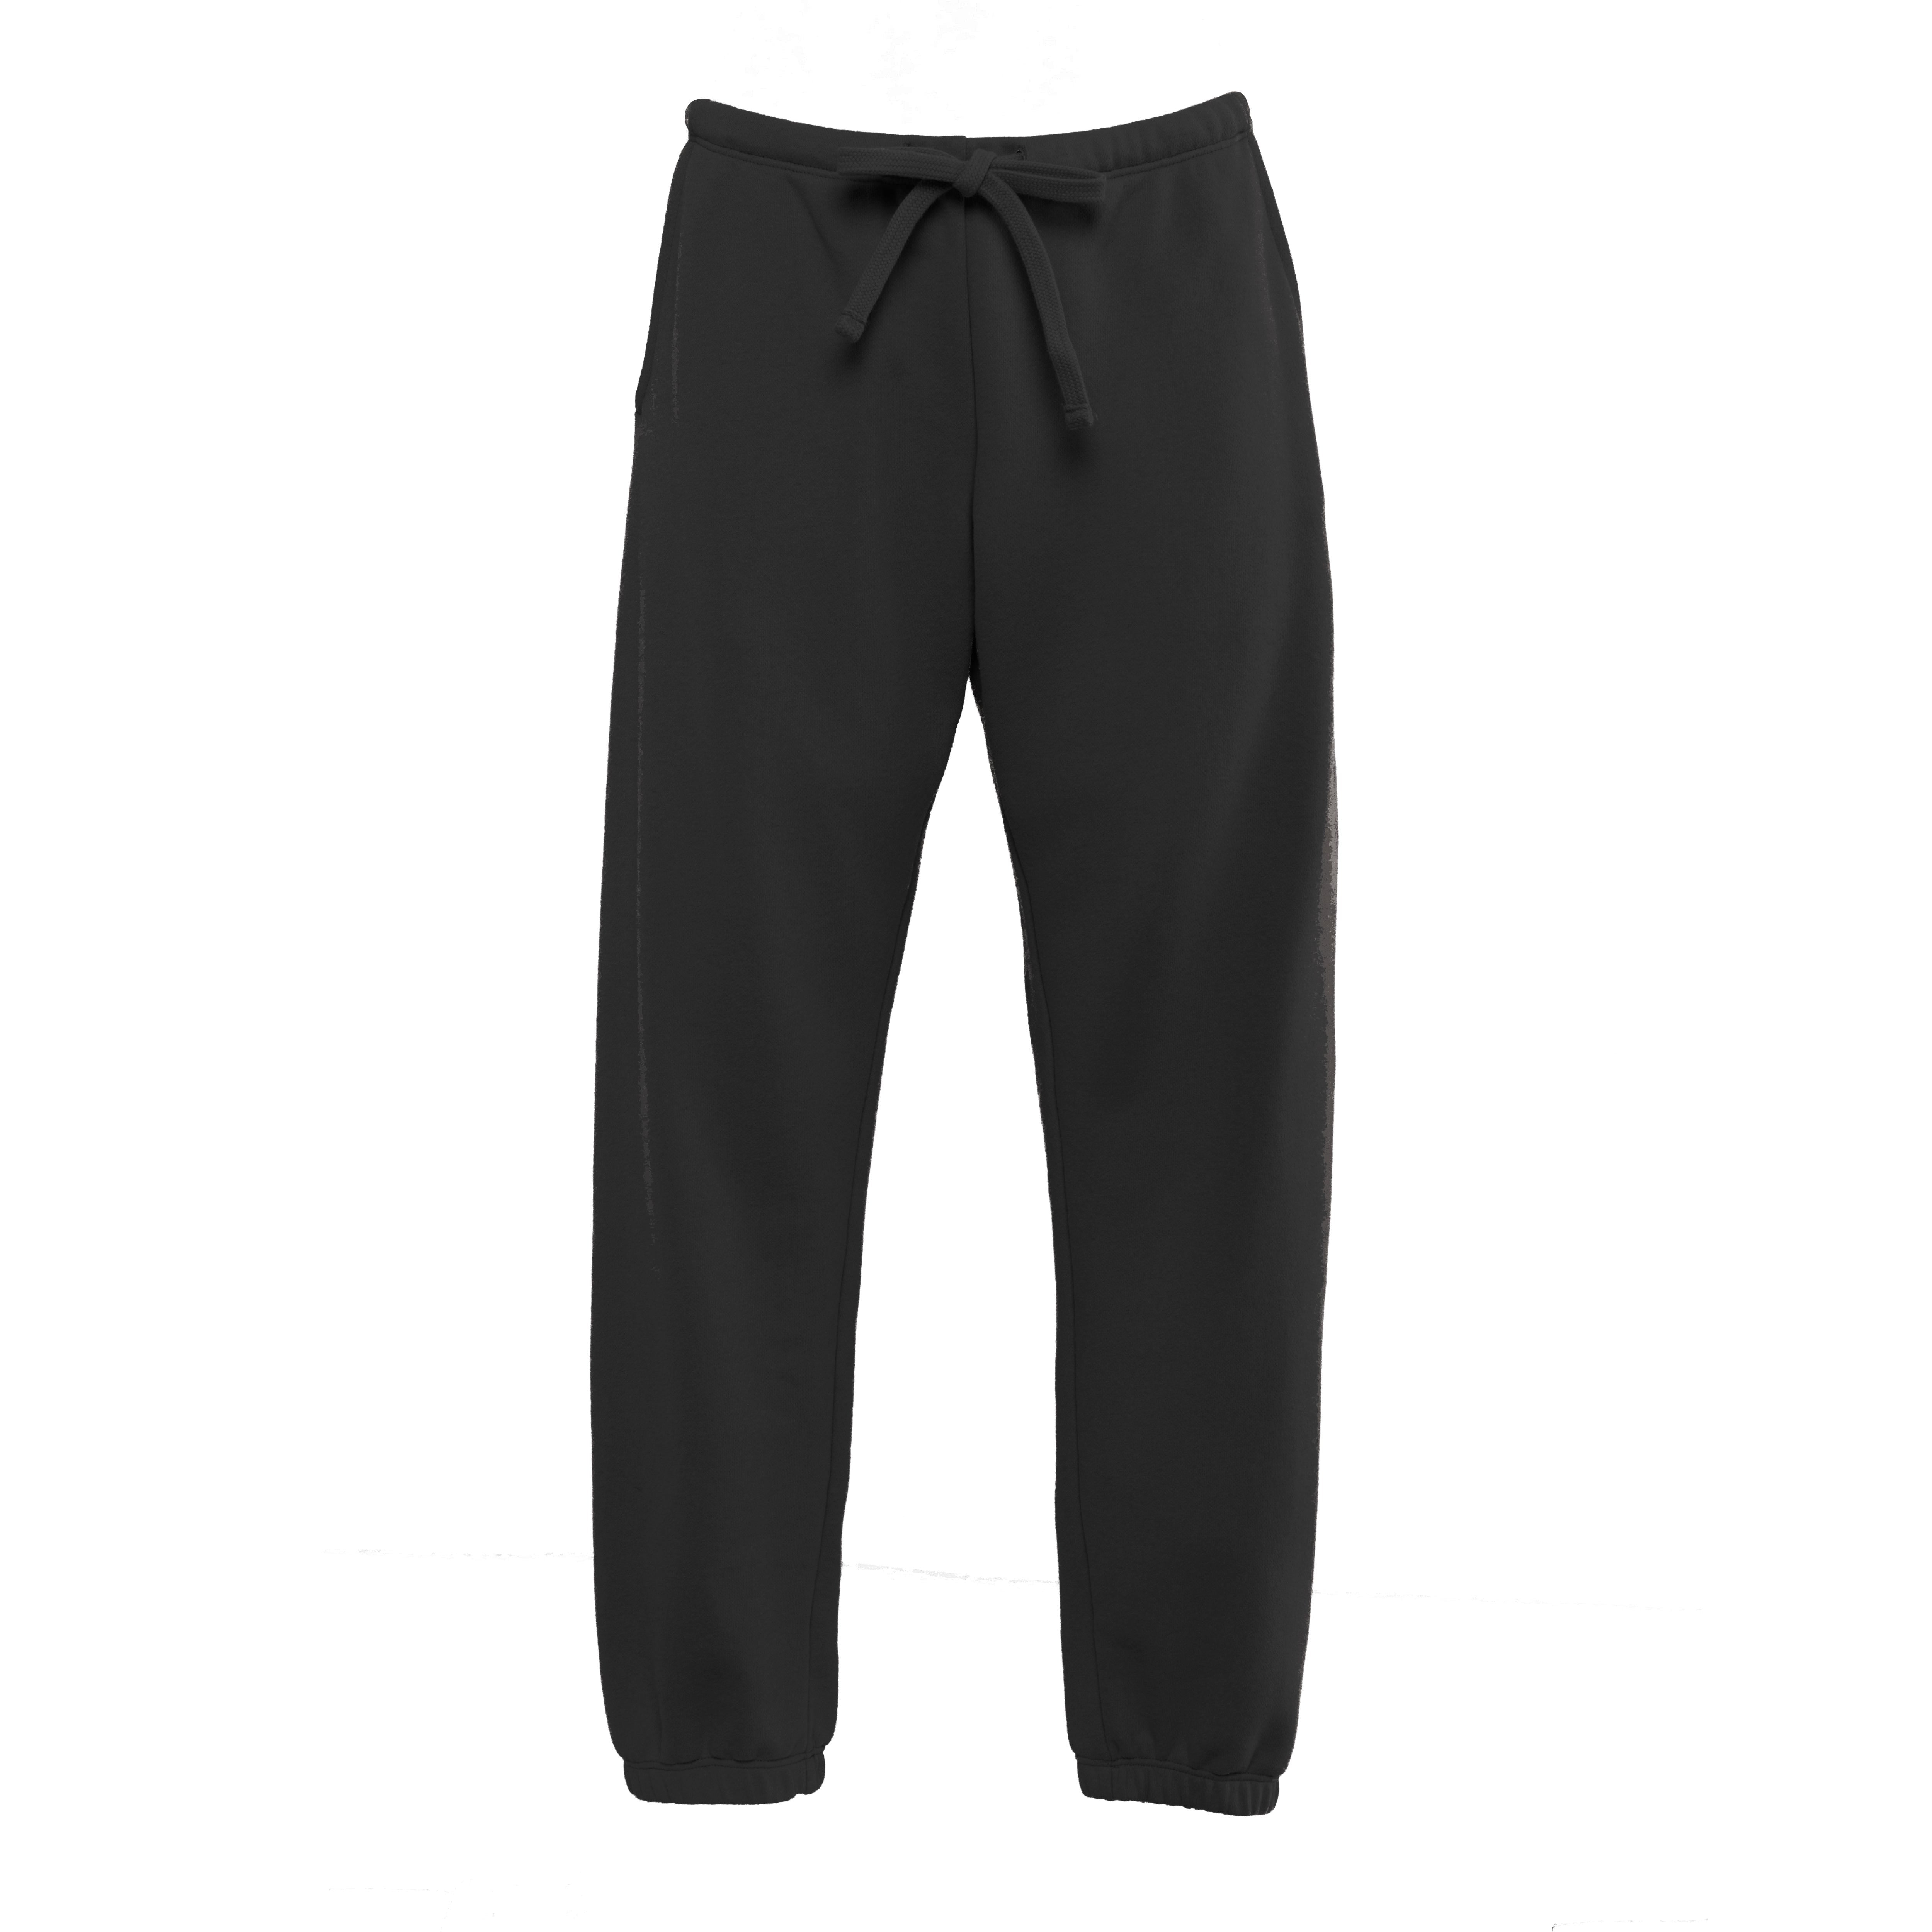 Women's sueded French Terry sweatpants